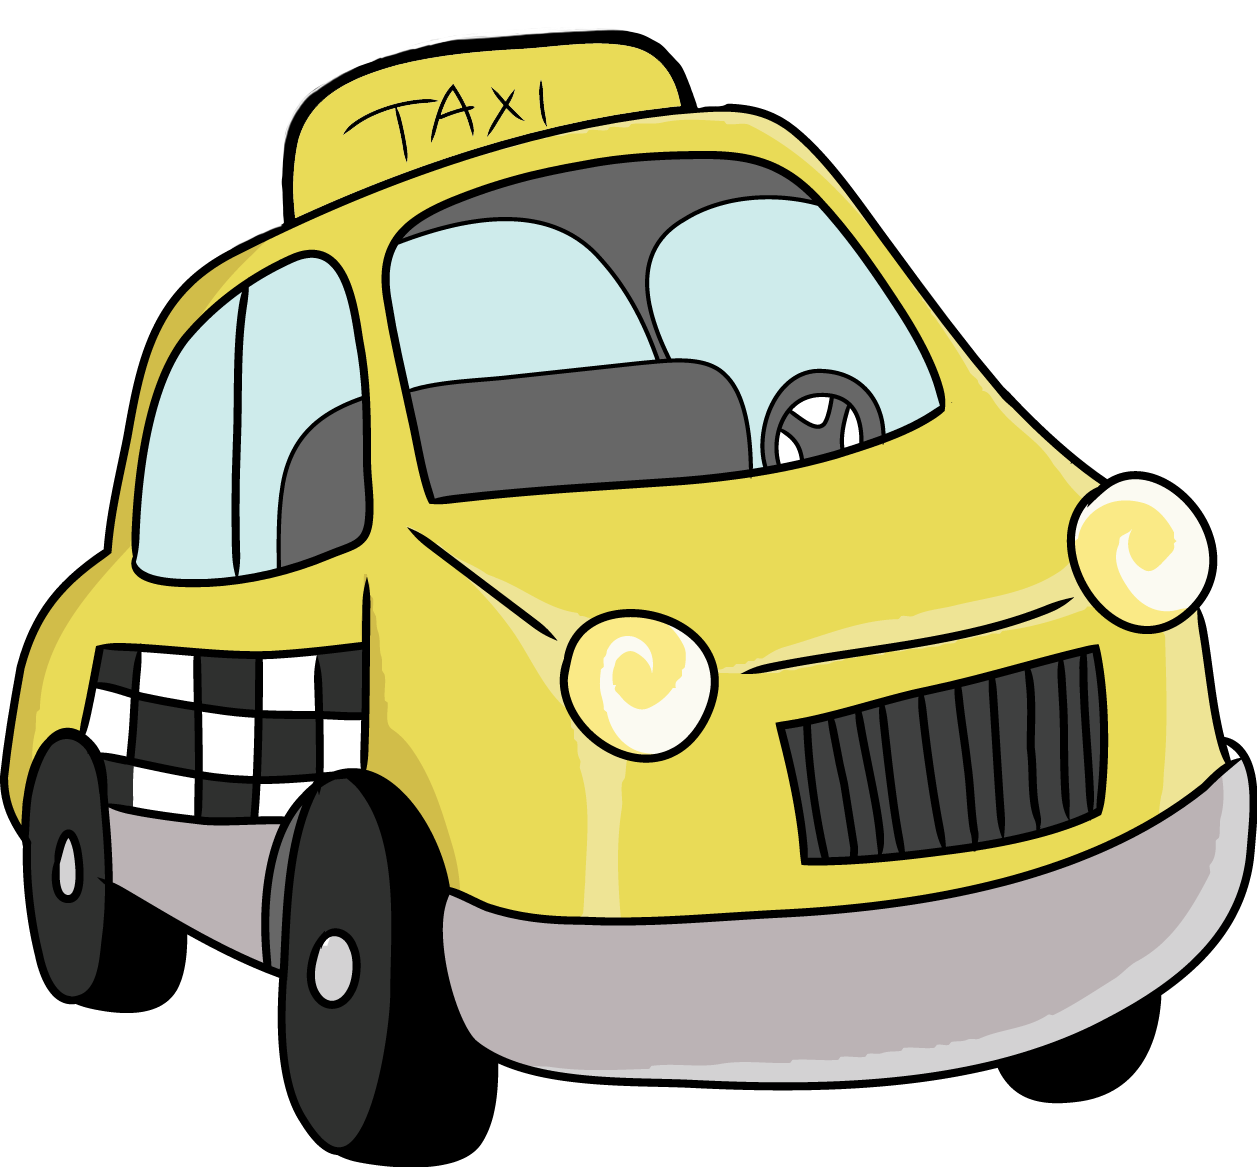 Free to Use & Public Domain Taxi Clip Art